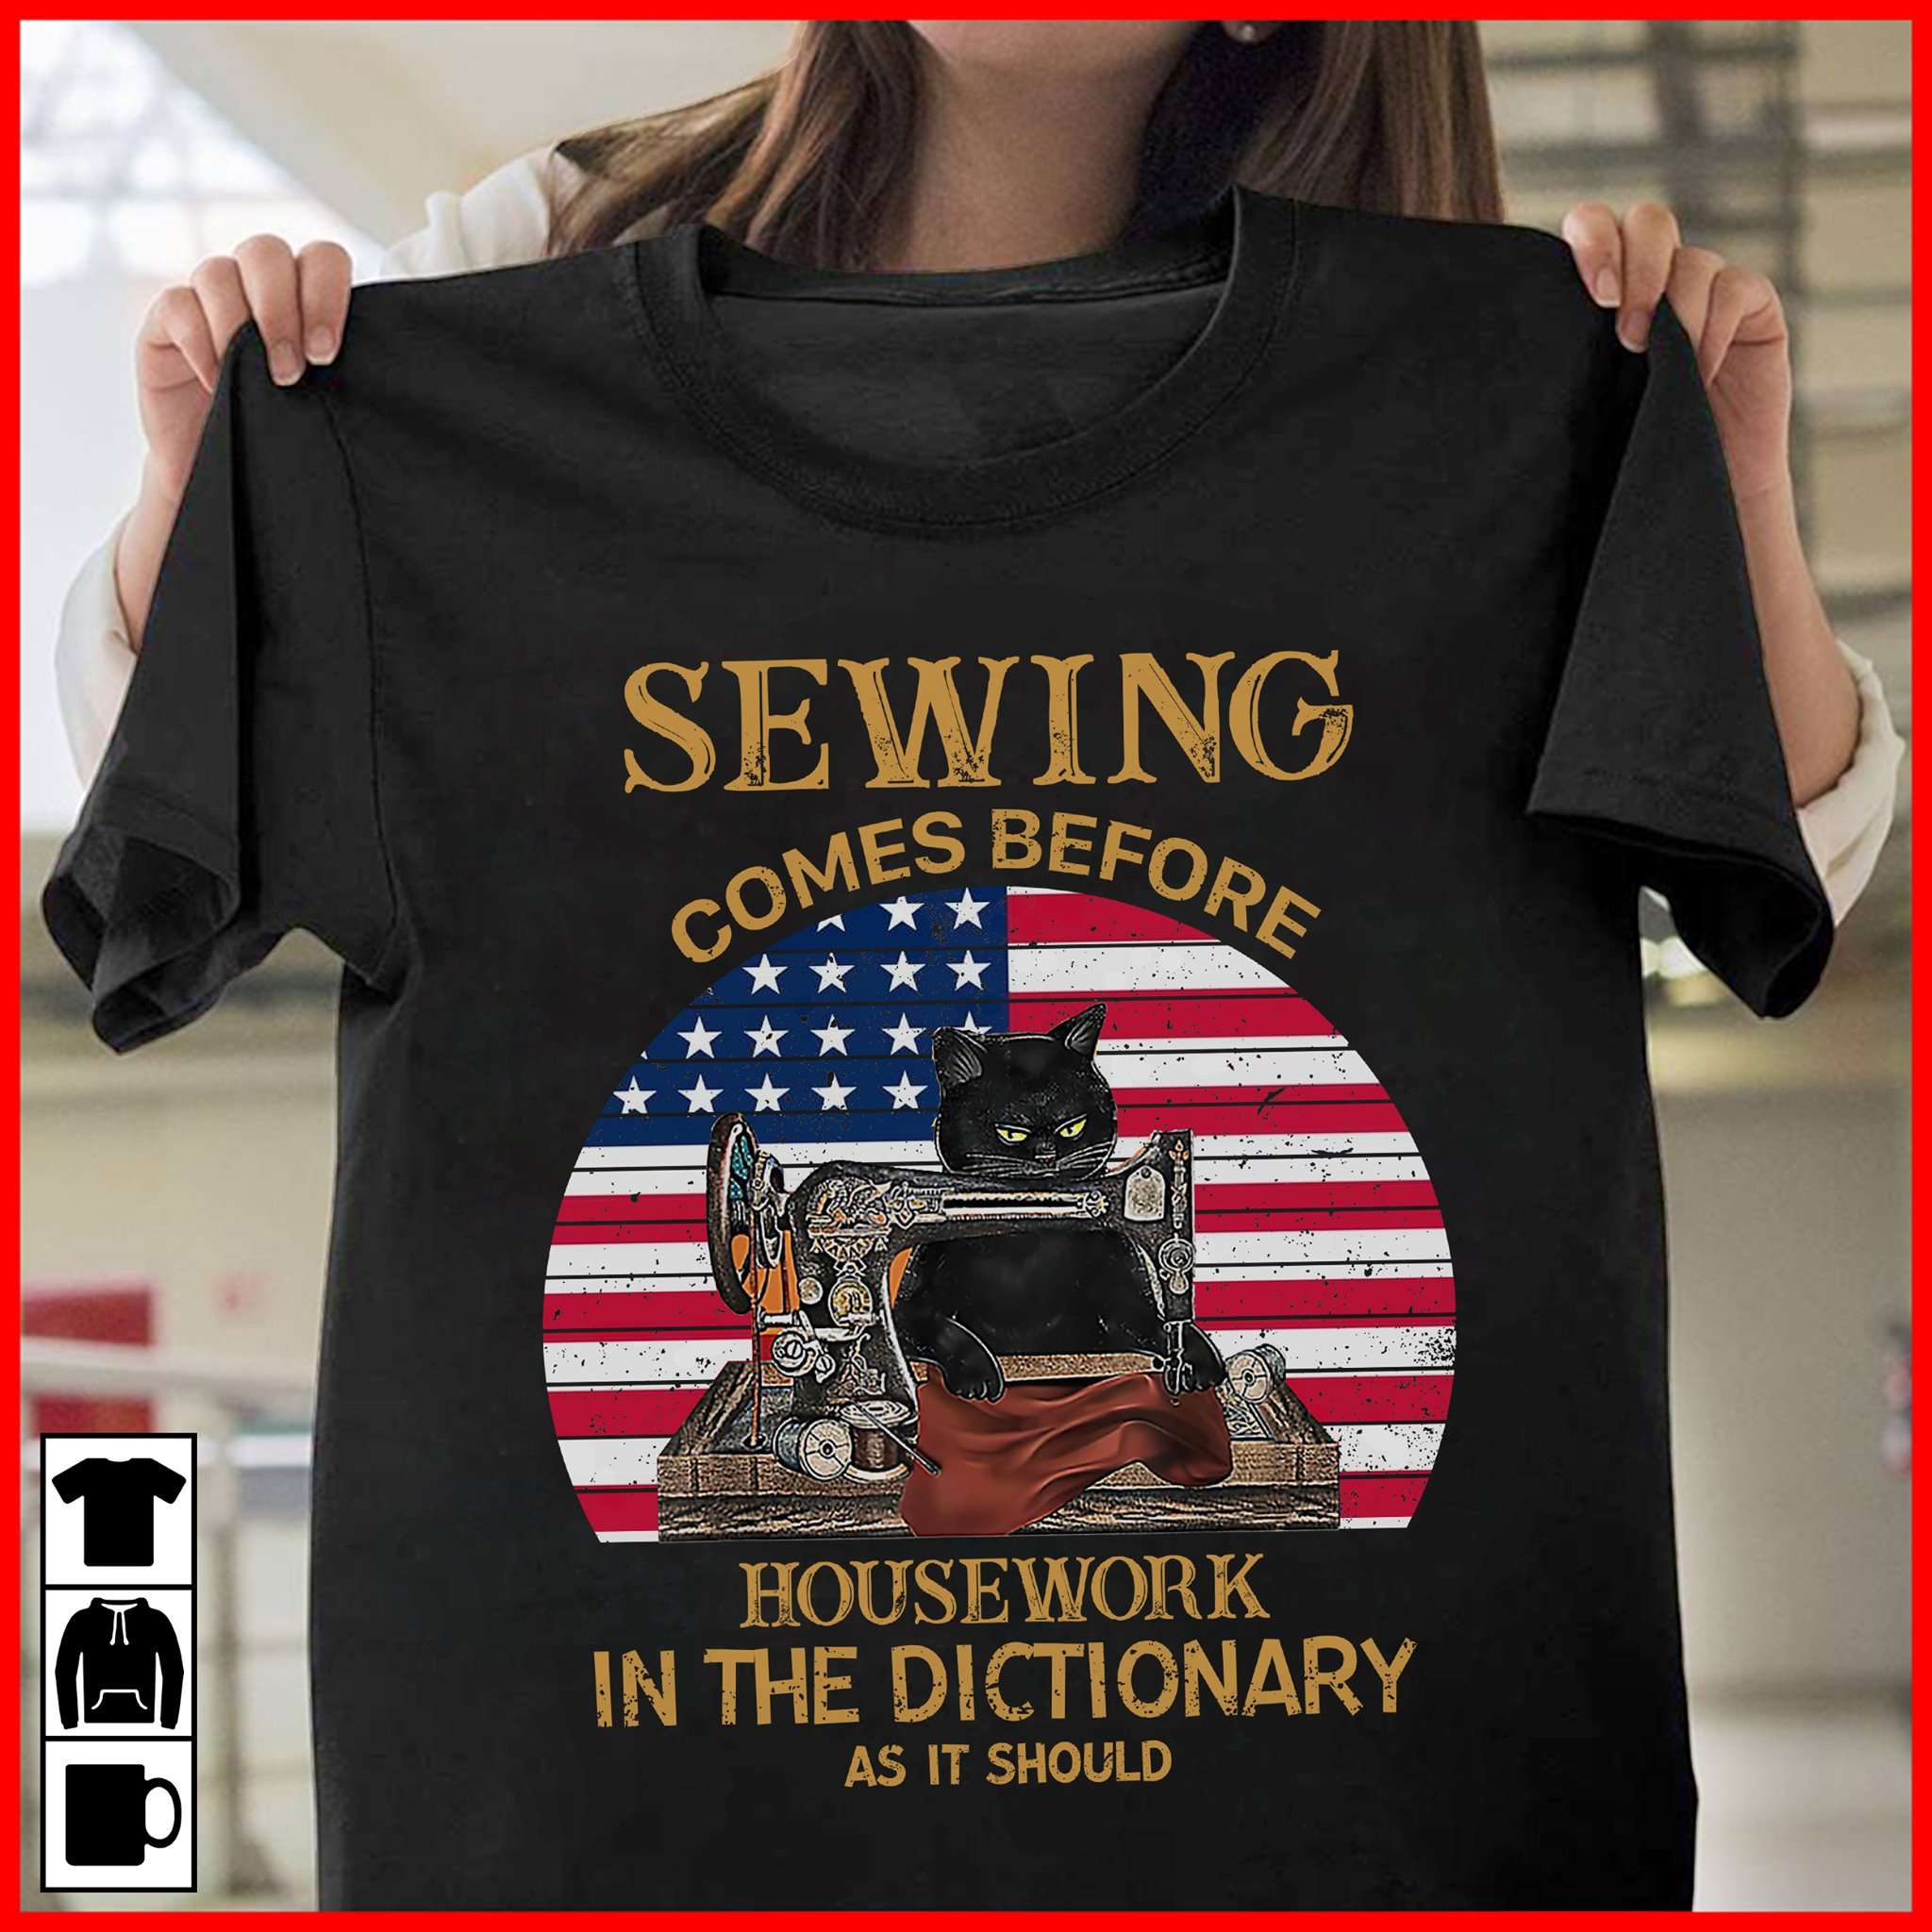 Sewing comes before housework in the dictionary as it should - American sewing lover, sewing machine